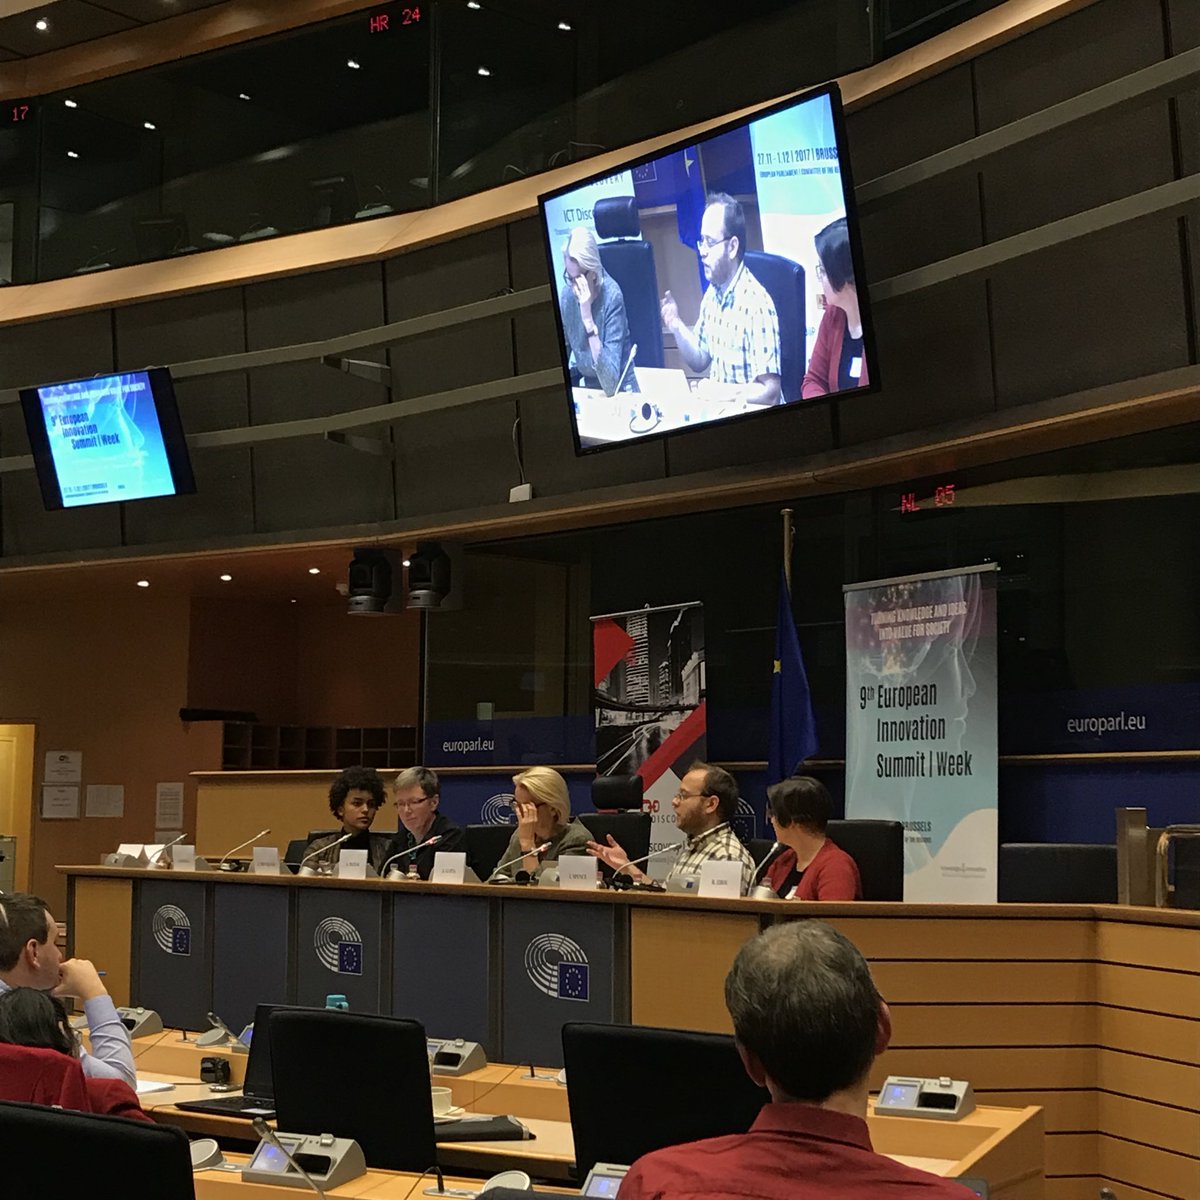 @atg_abhishek emphasizes the responsibility of technical researchers when they are using public data sets. 
#9EIS #acceleratinginnovation #openinnovation @k4innovation @Europarl_EN